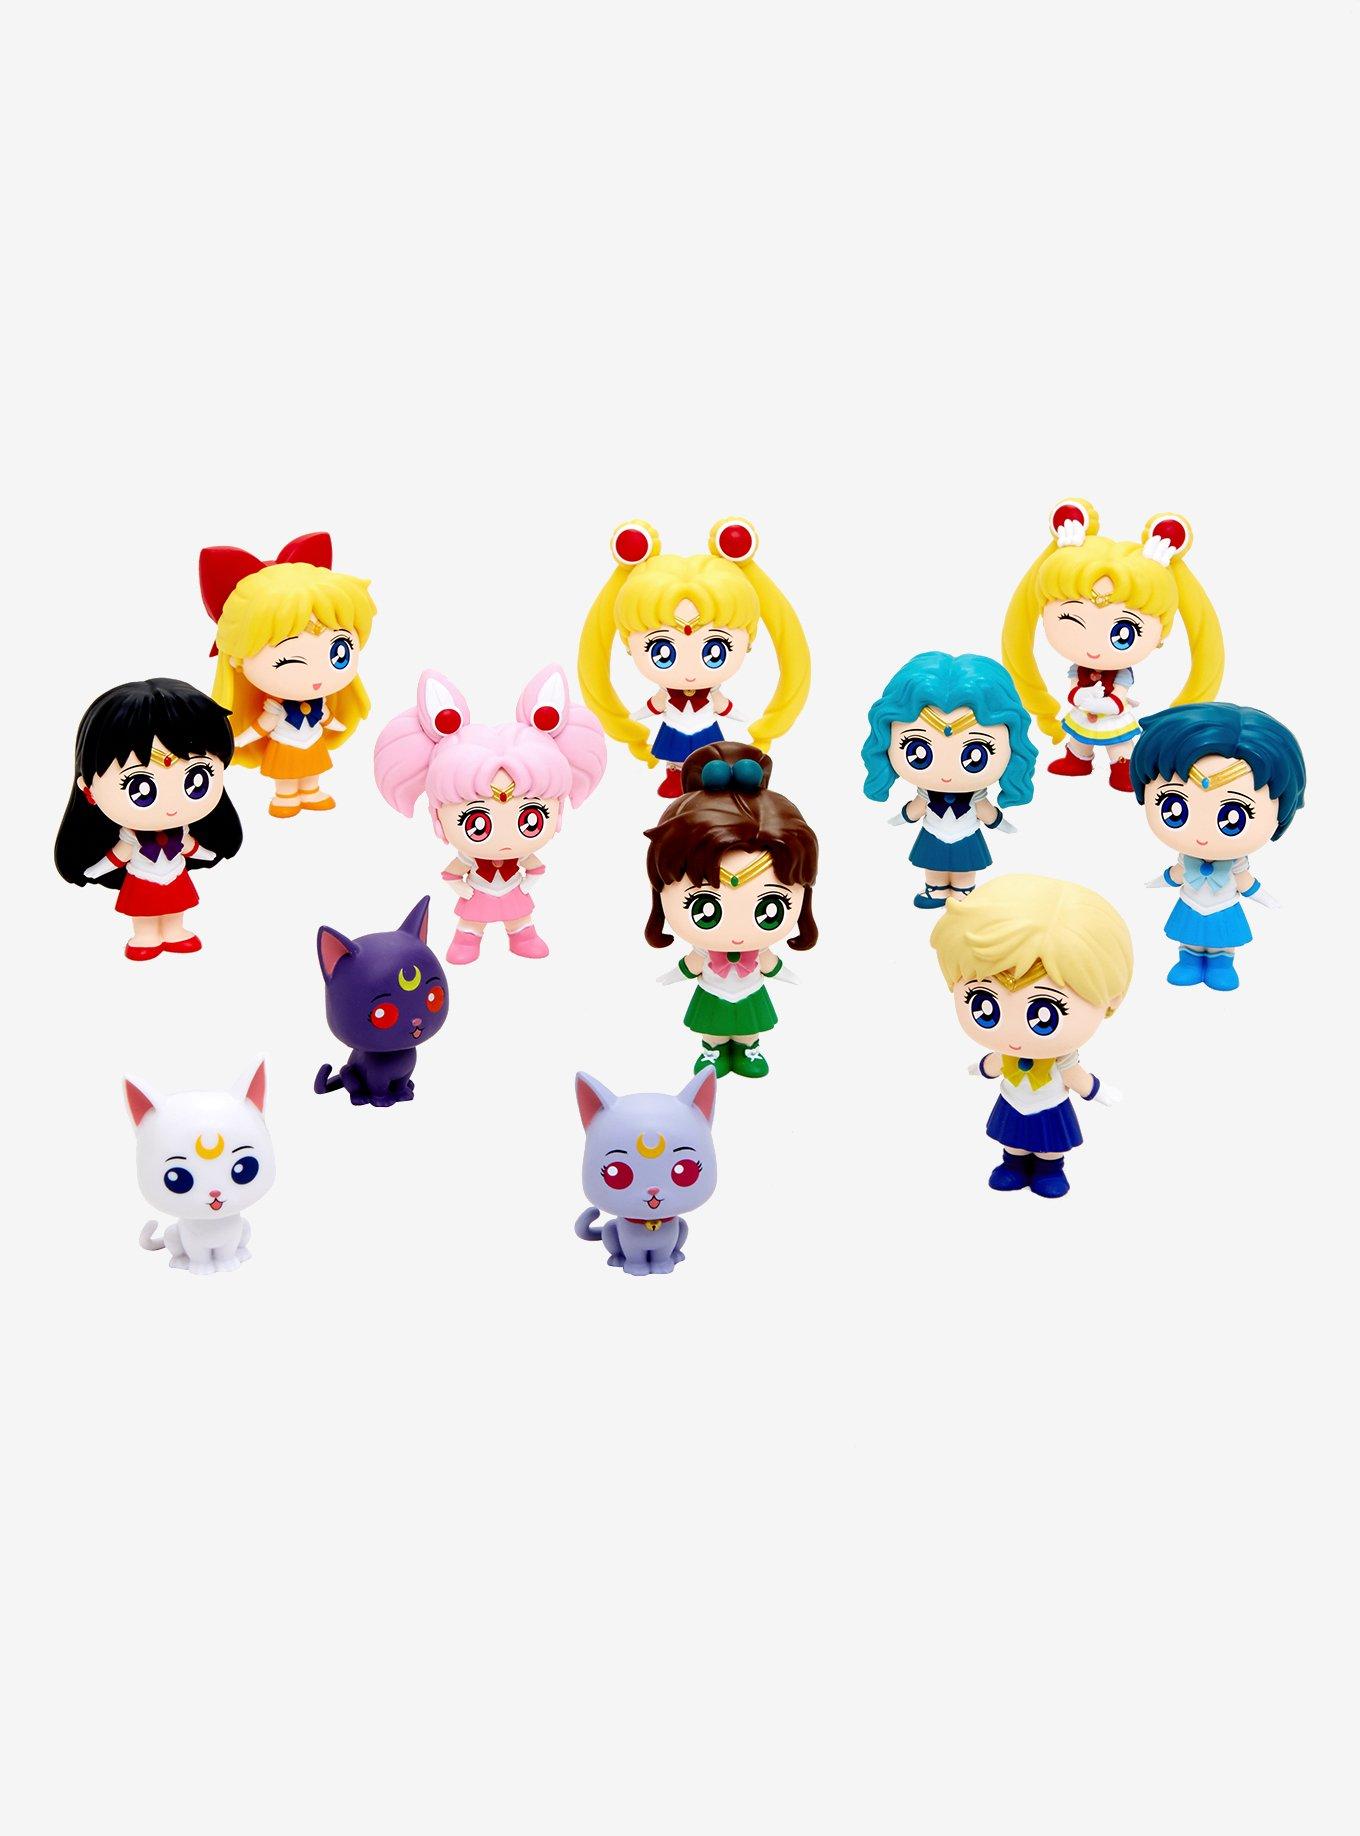 Funko Sailor Moon Mystery Minis Blind Box Figure Hot Topic Exclusive Variants, , alternate